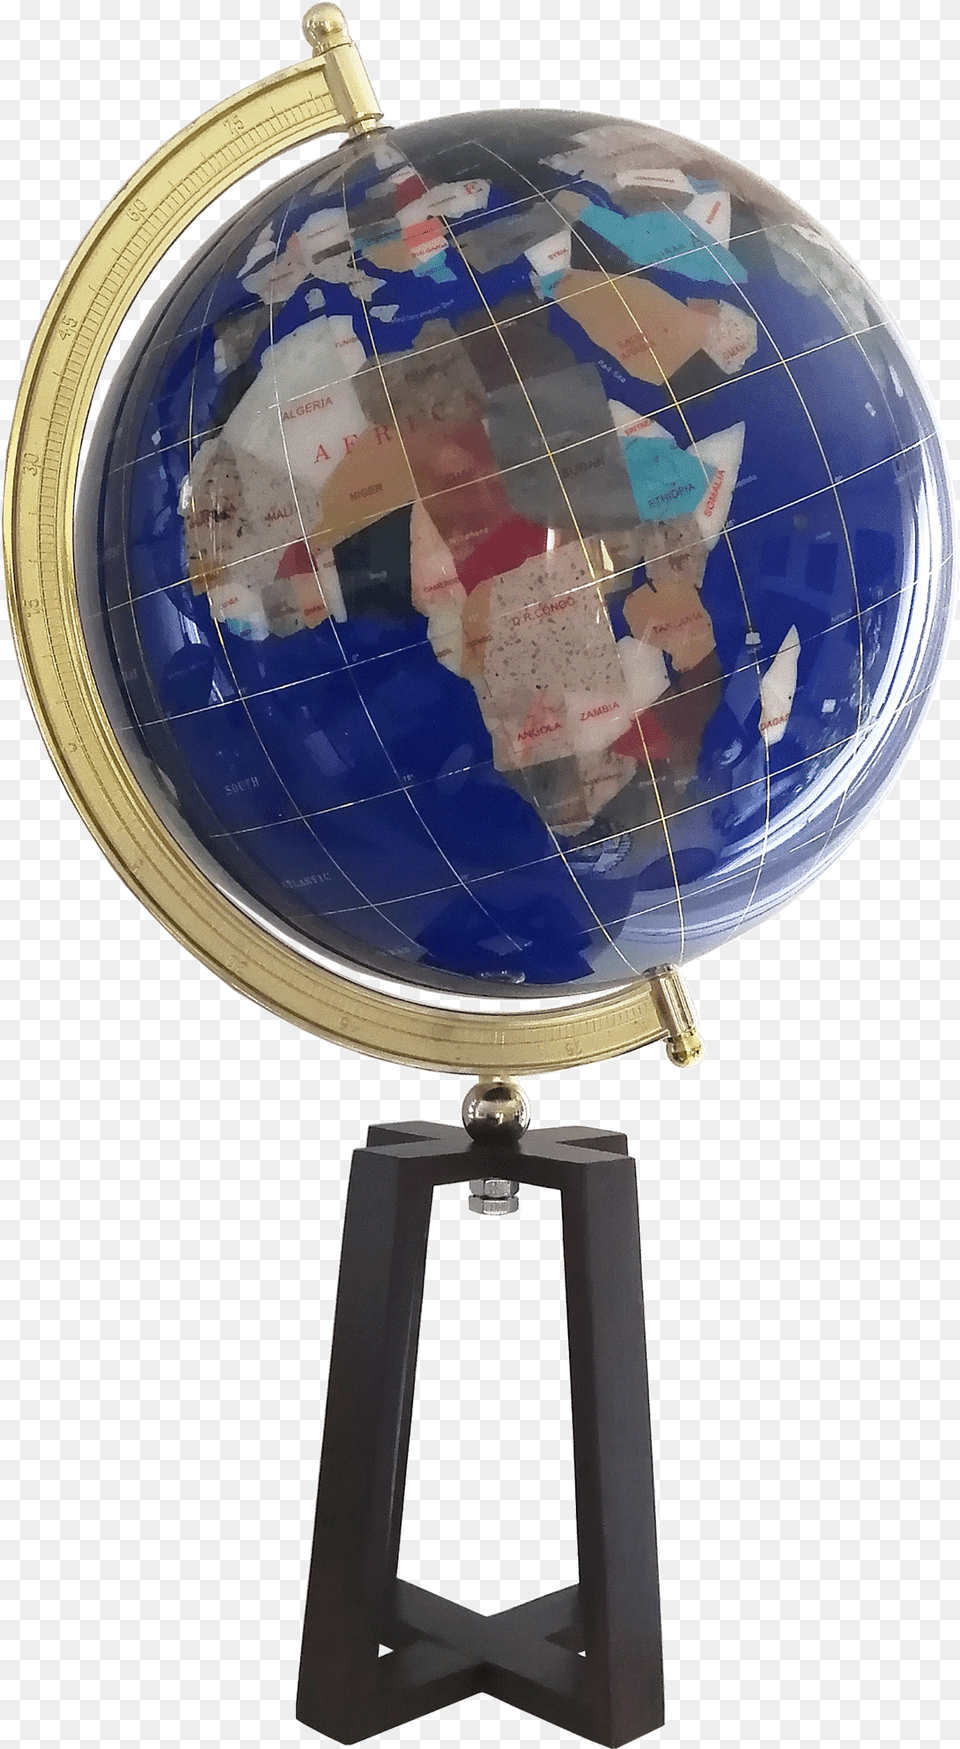 Gemstone Globe Tabletop 33 Cm Blue Cambridge Wooden Globe, Astronomy, Outer Space, Planet, Baby Png Image